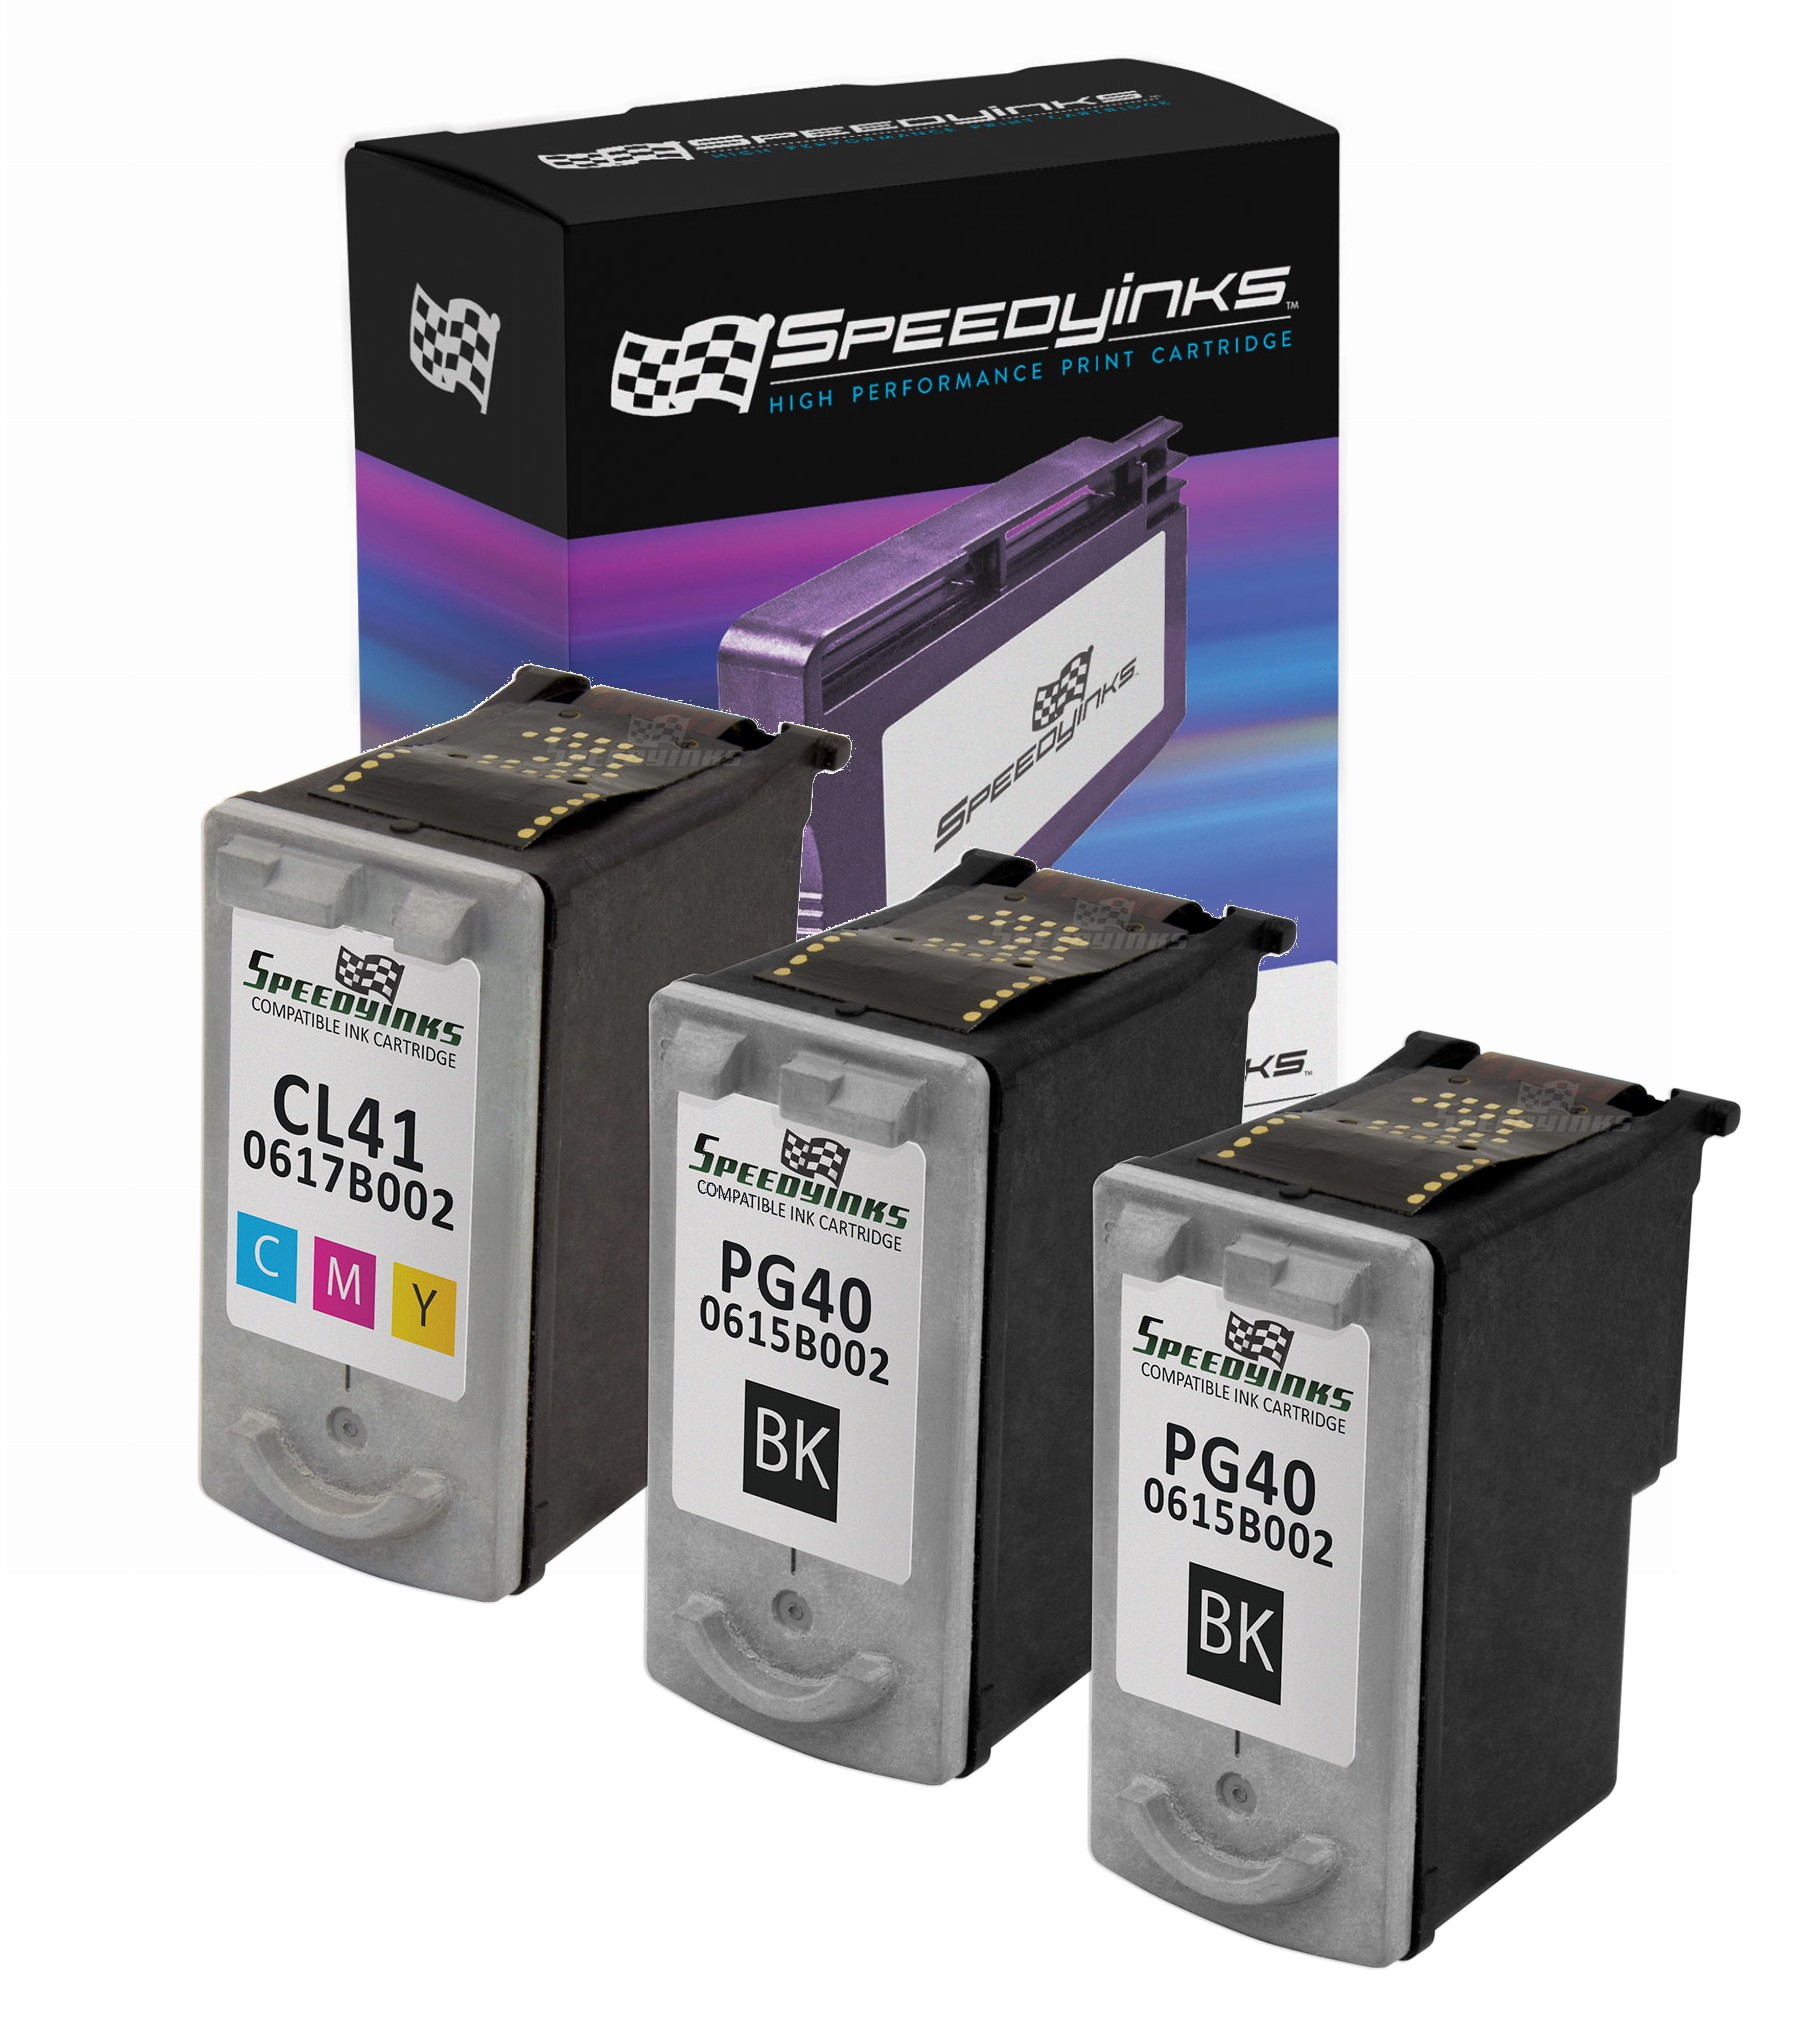 SpeedyInks Remanufactured Cartridge Replacement for Canon PG40 and CL41 (2 Black, 1 Color, 3-Pack) - image 1 of 6